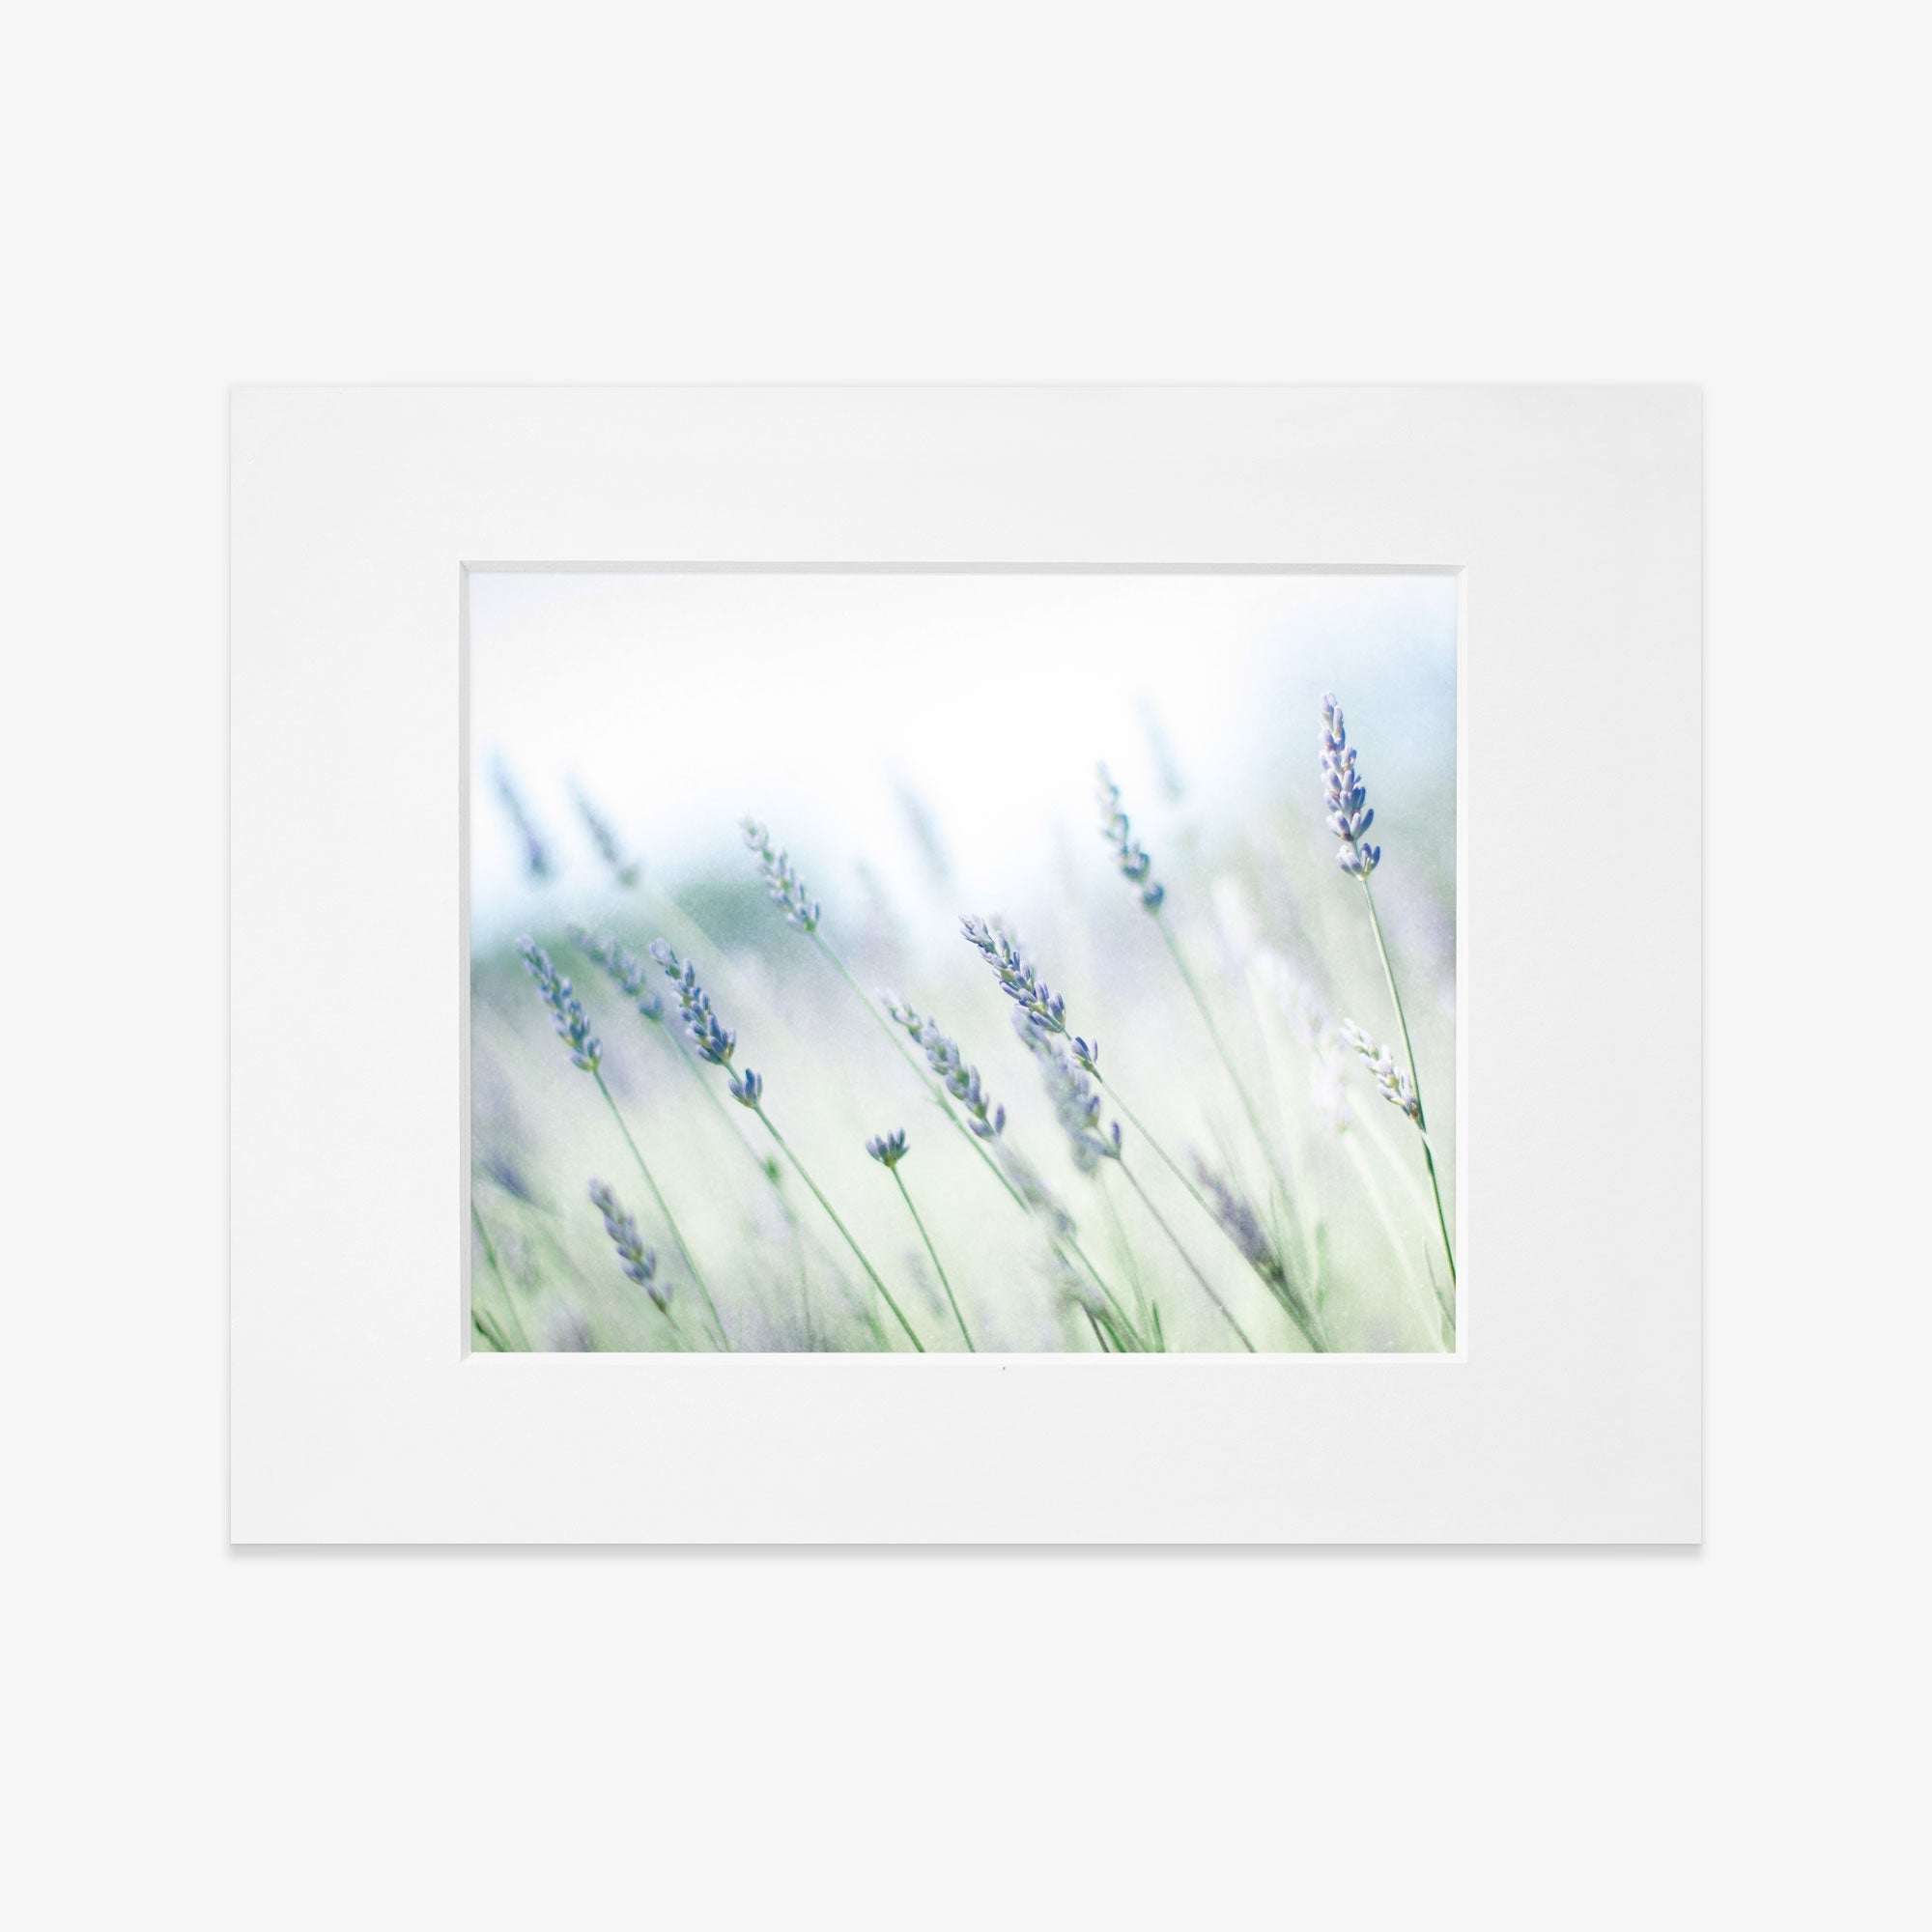 A framed photograph of delicate lavender flowers from Santa Ynez Valley against a soft-focus background, creating an impressionistic, serene image. The Rustic Farmhouse Floral Wall Art, &#39;Buds of Lavender&#39; from Offley Green features flowers in gentle hues of purple and green.